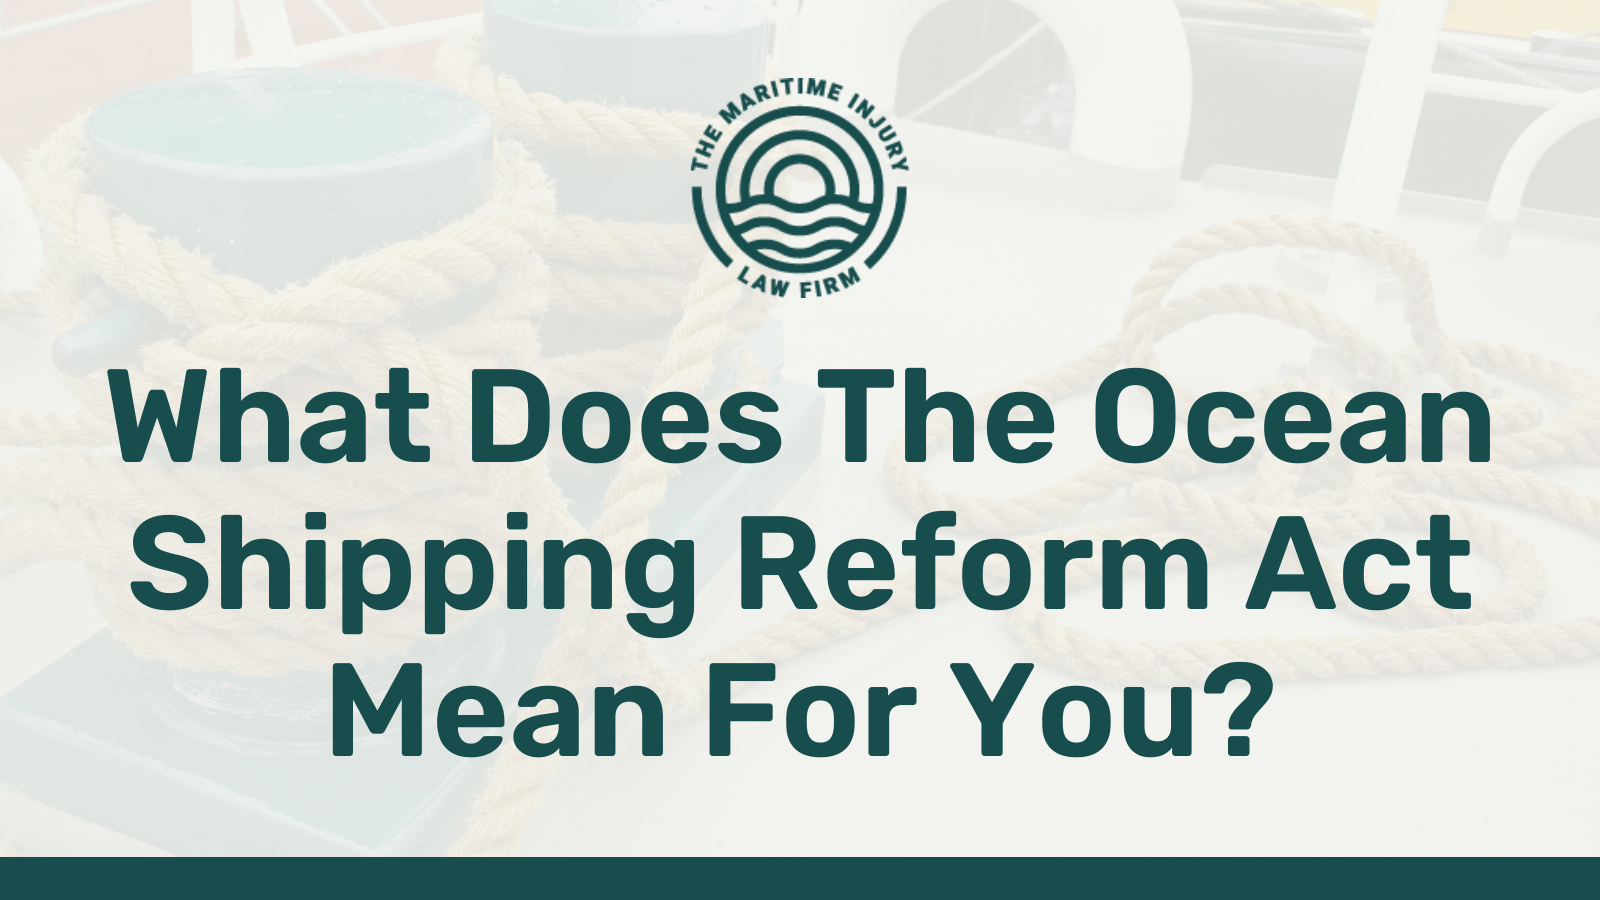 What Does The Ocean Shipping Reform Act Mean For You - maritime injury law firm - George Vourvoulias